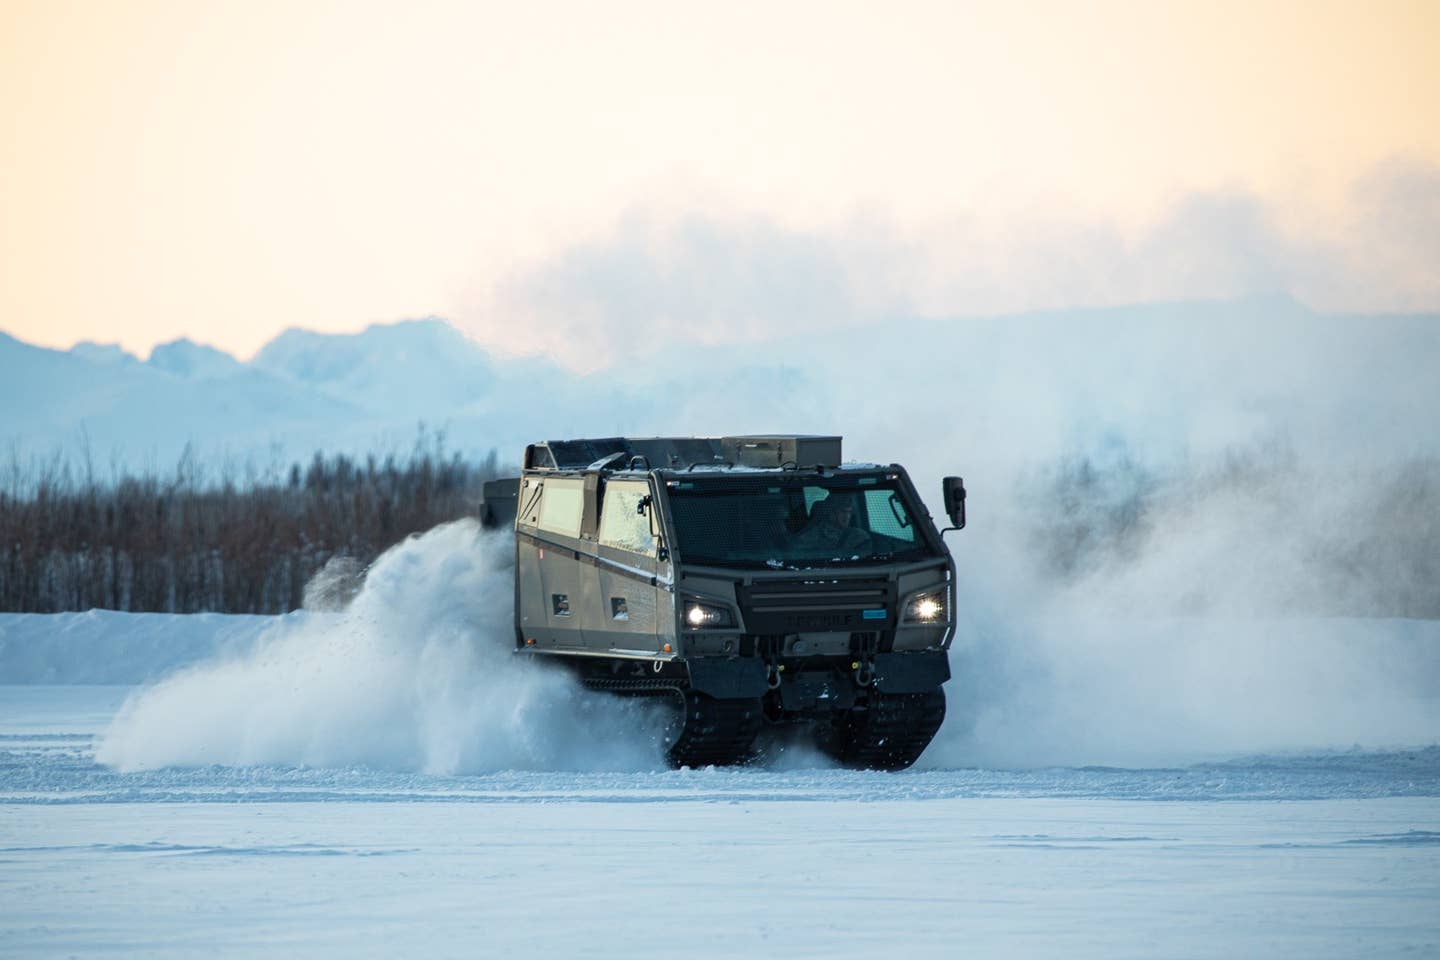 Large windows and heated compartments are designed for soldier comfort in extreme cold. <em>BAE Systems</em>